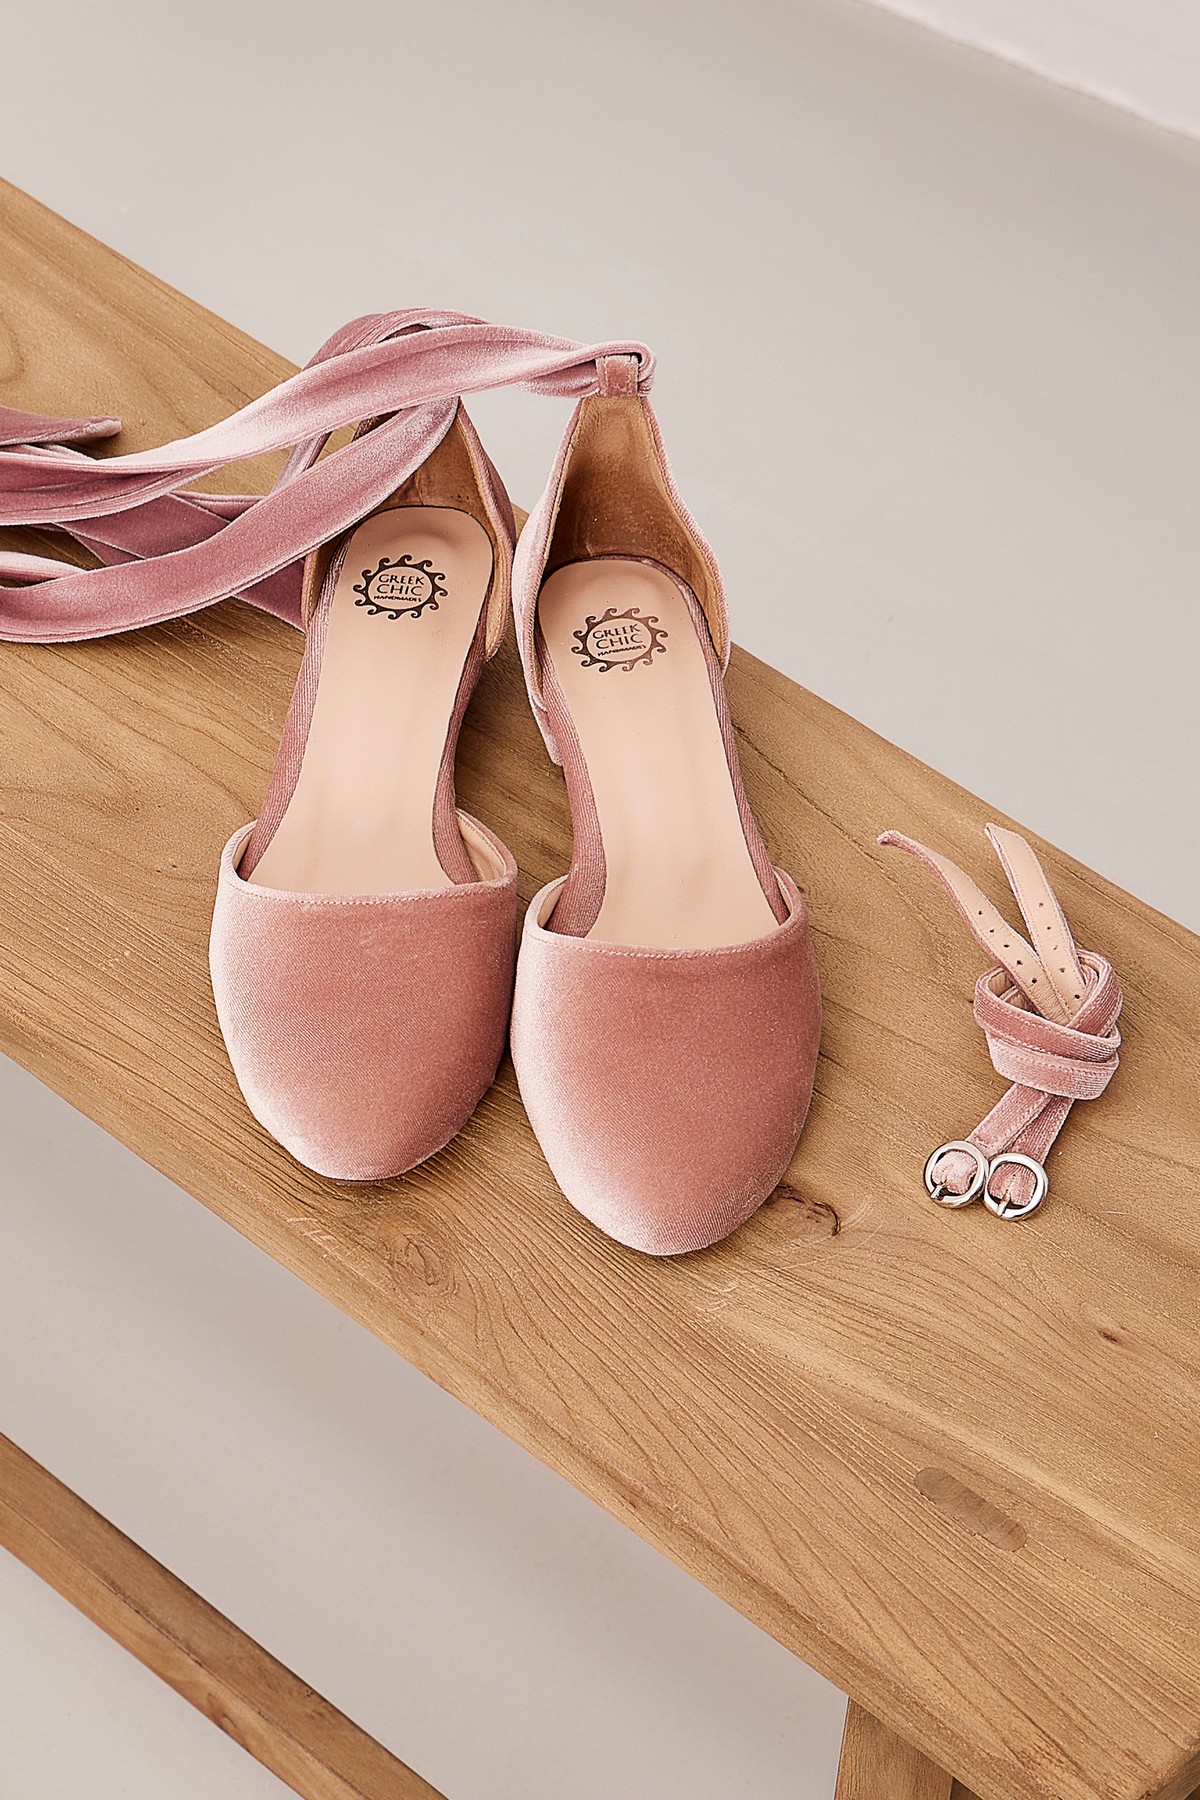 ballet flats with ties and ankle strap